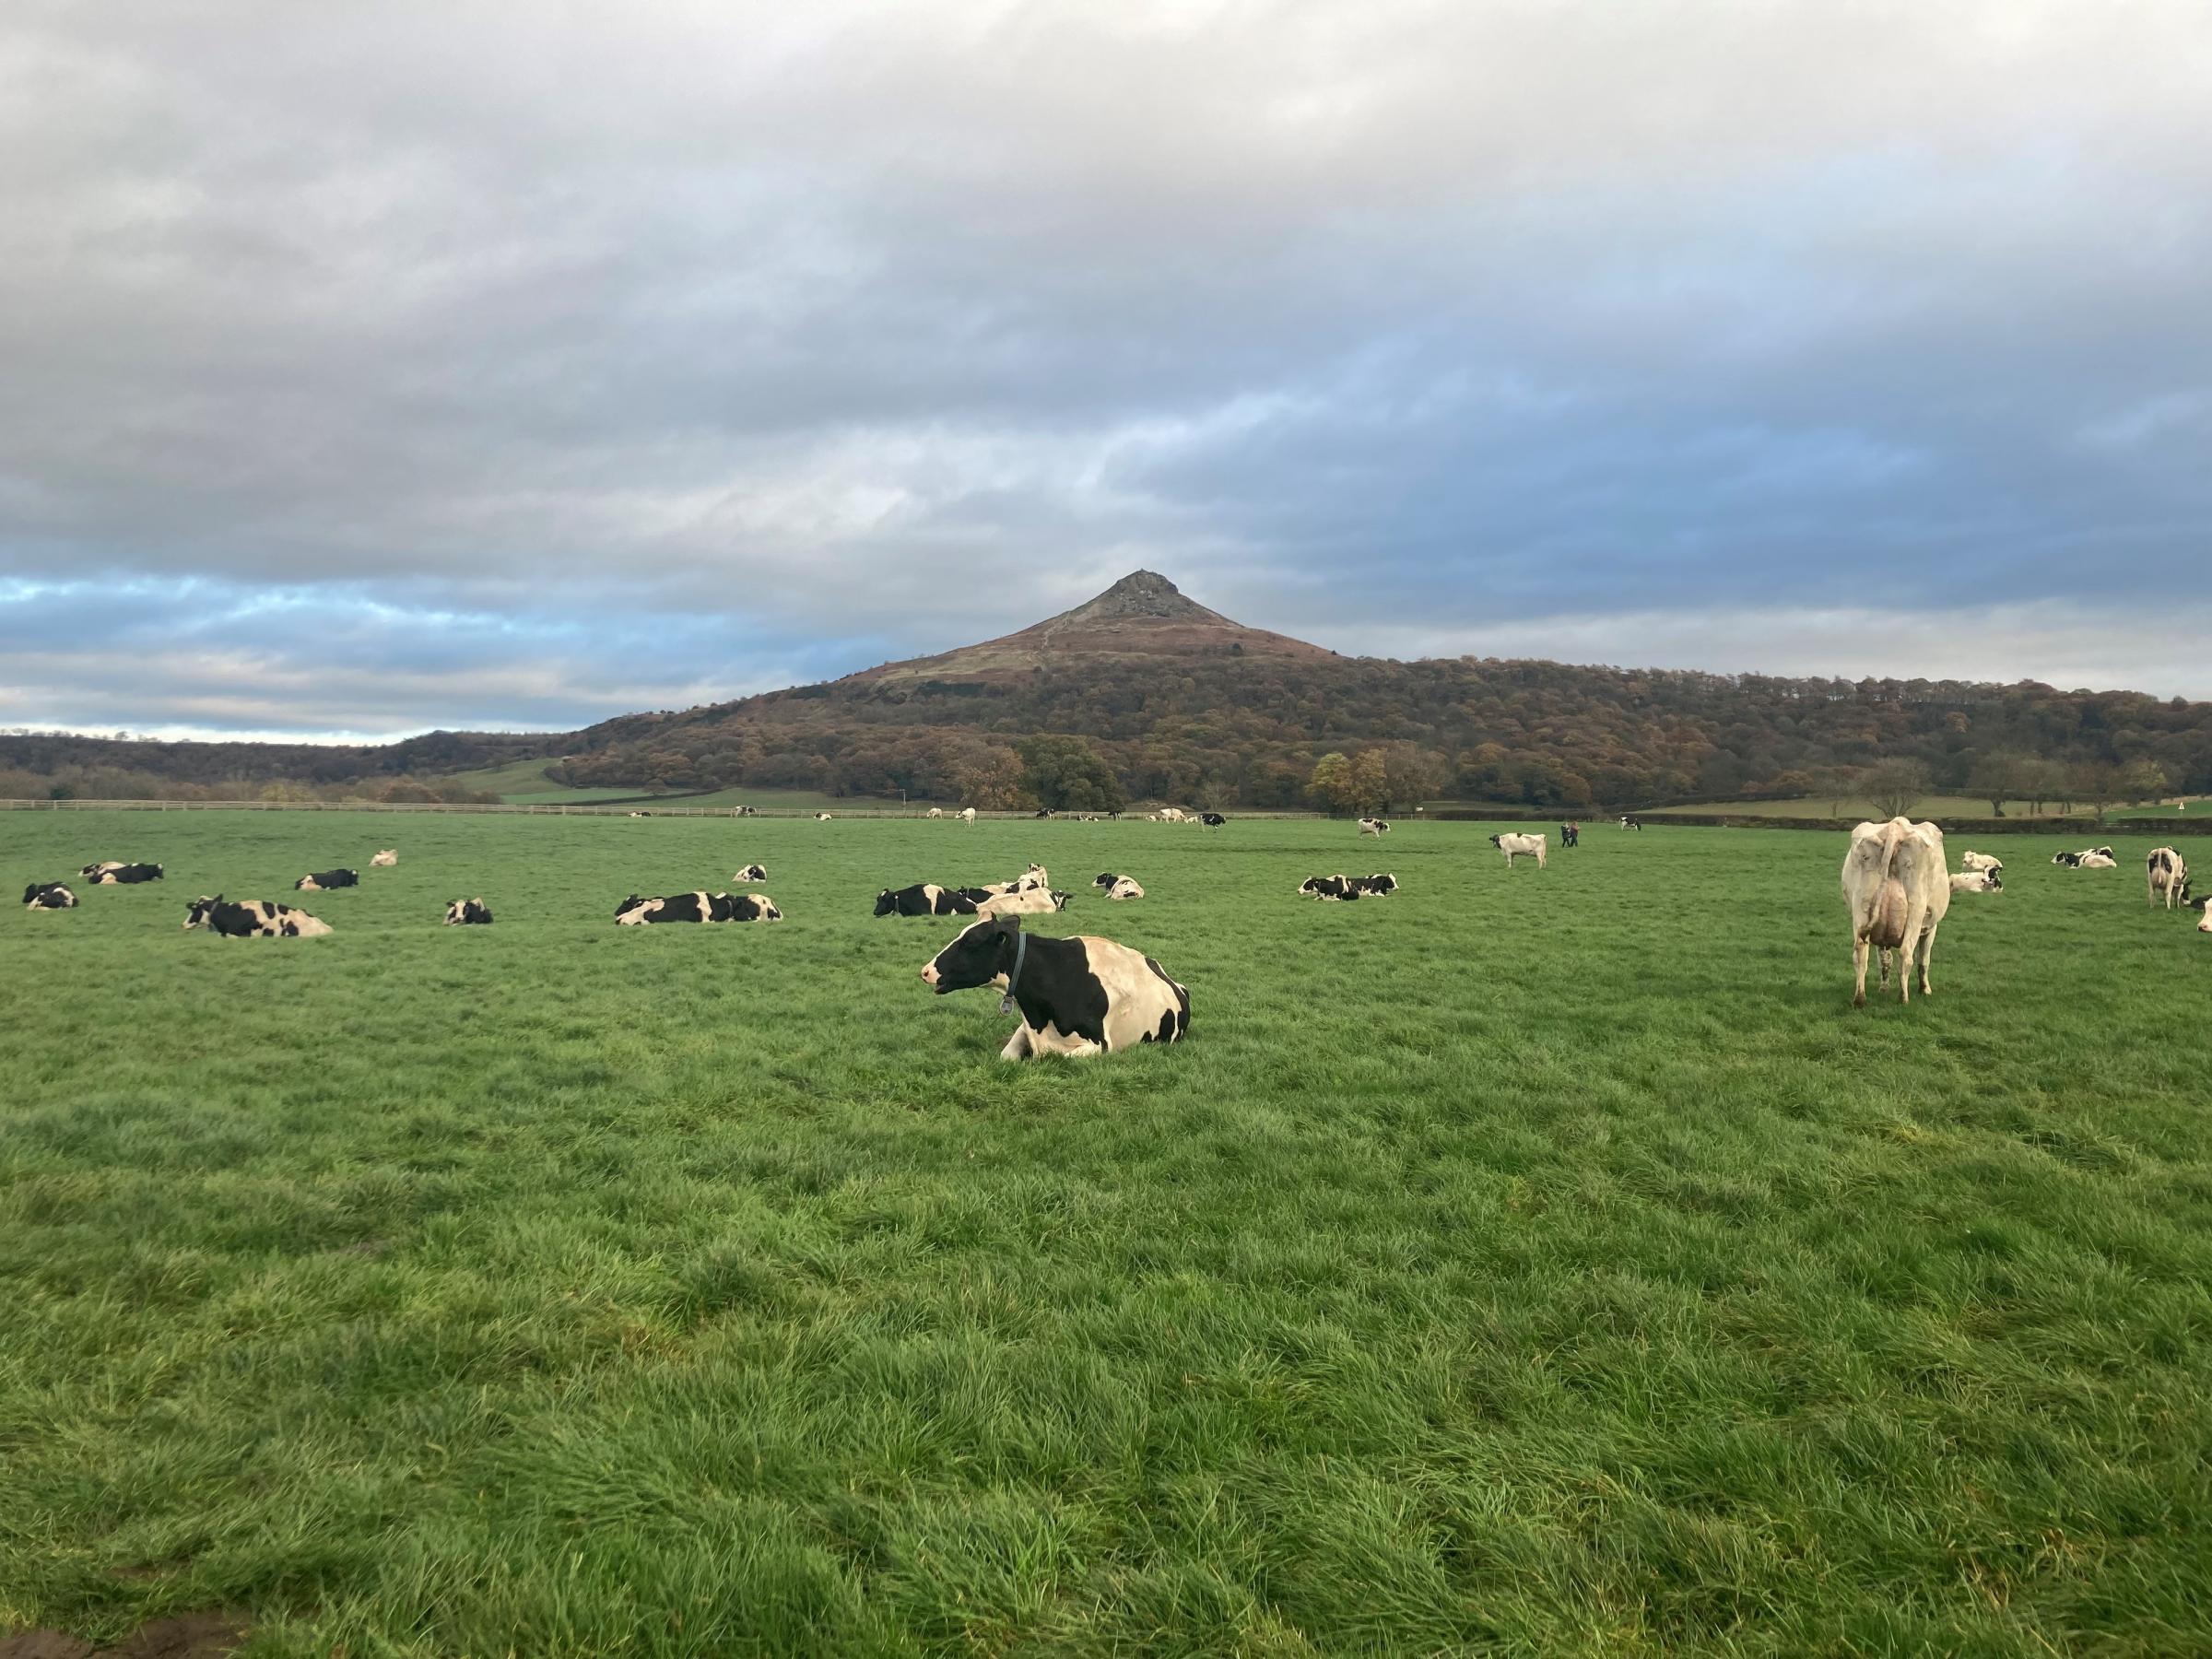 The cows at Whitegate Farm under the picturesque Roseberry Topping